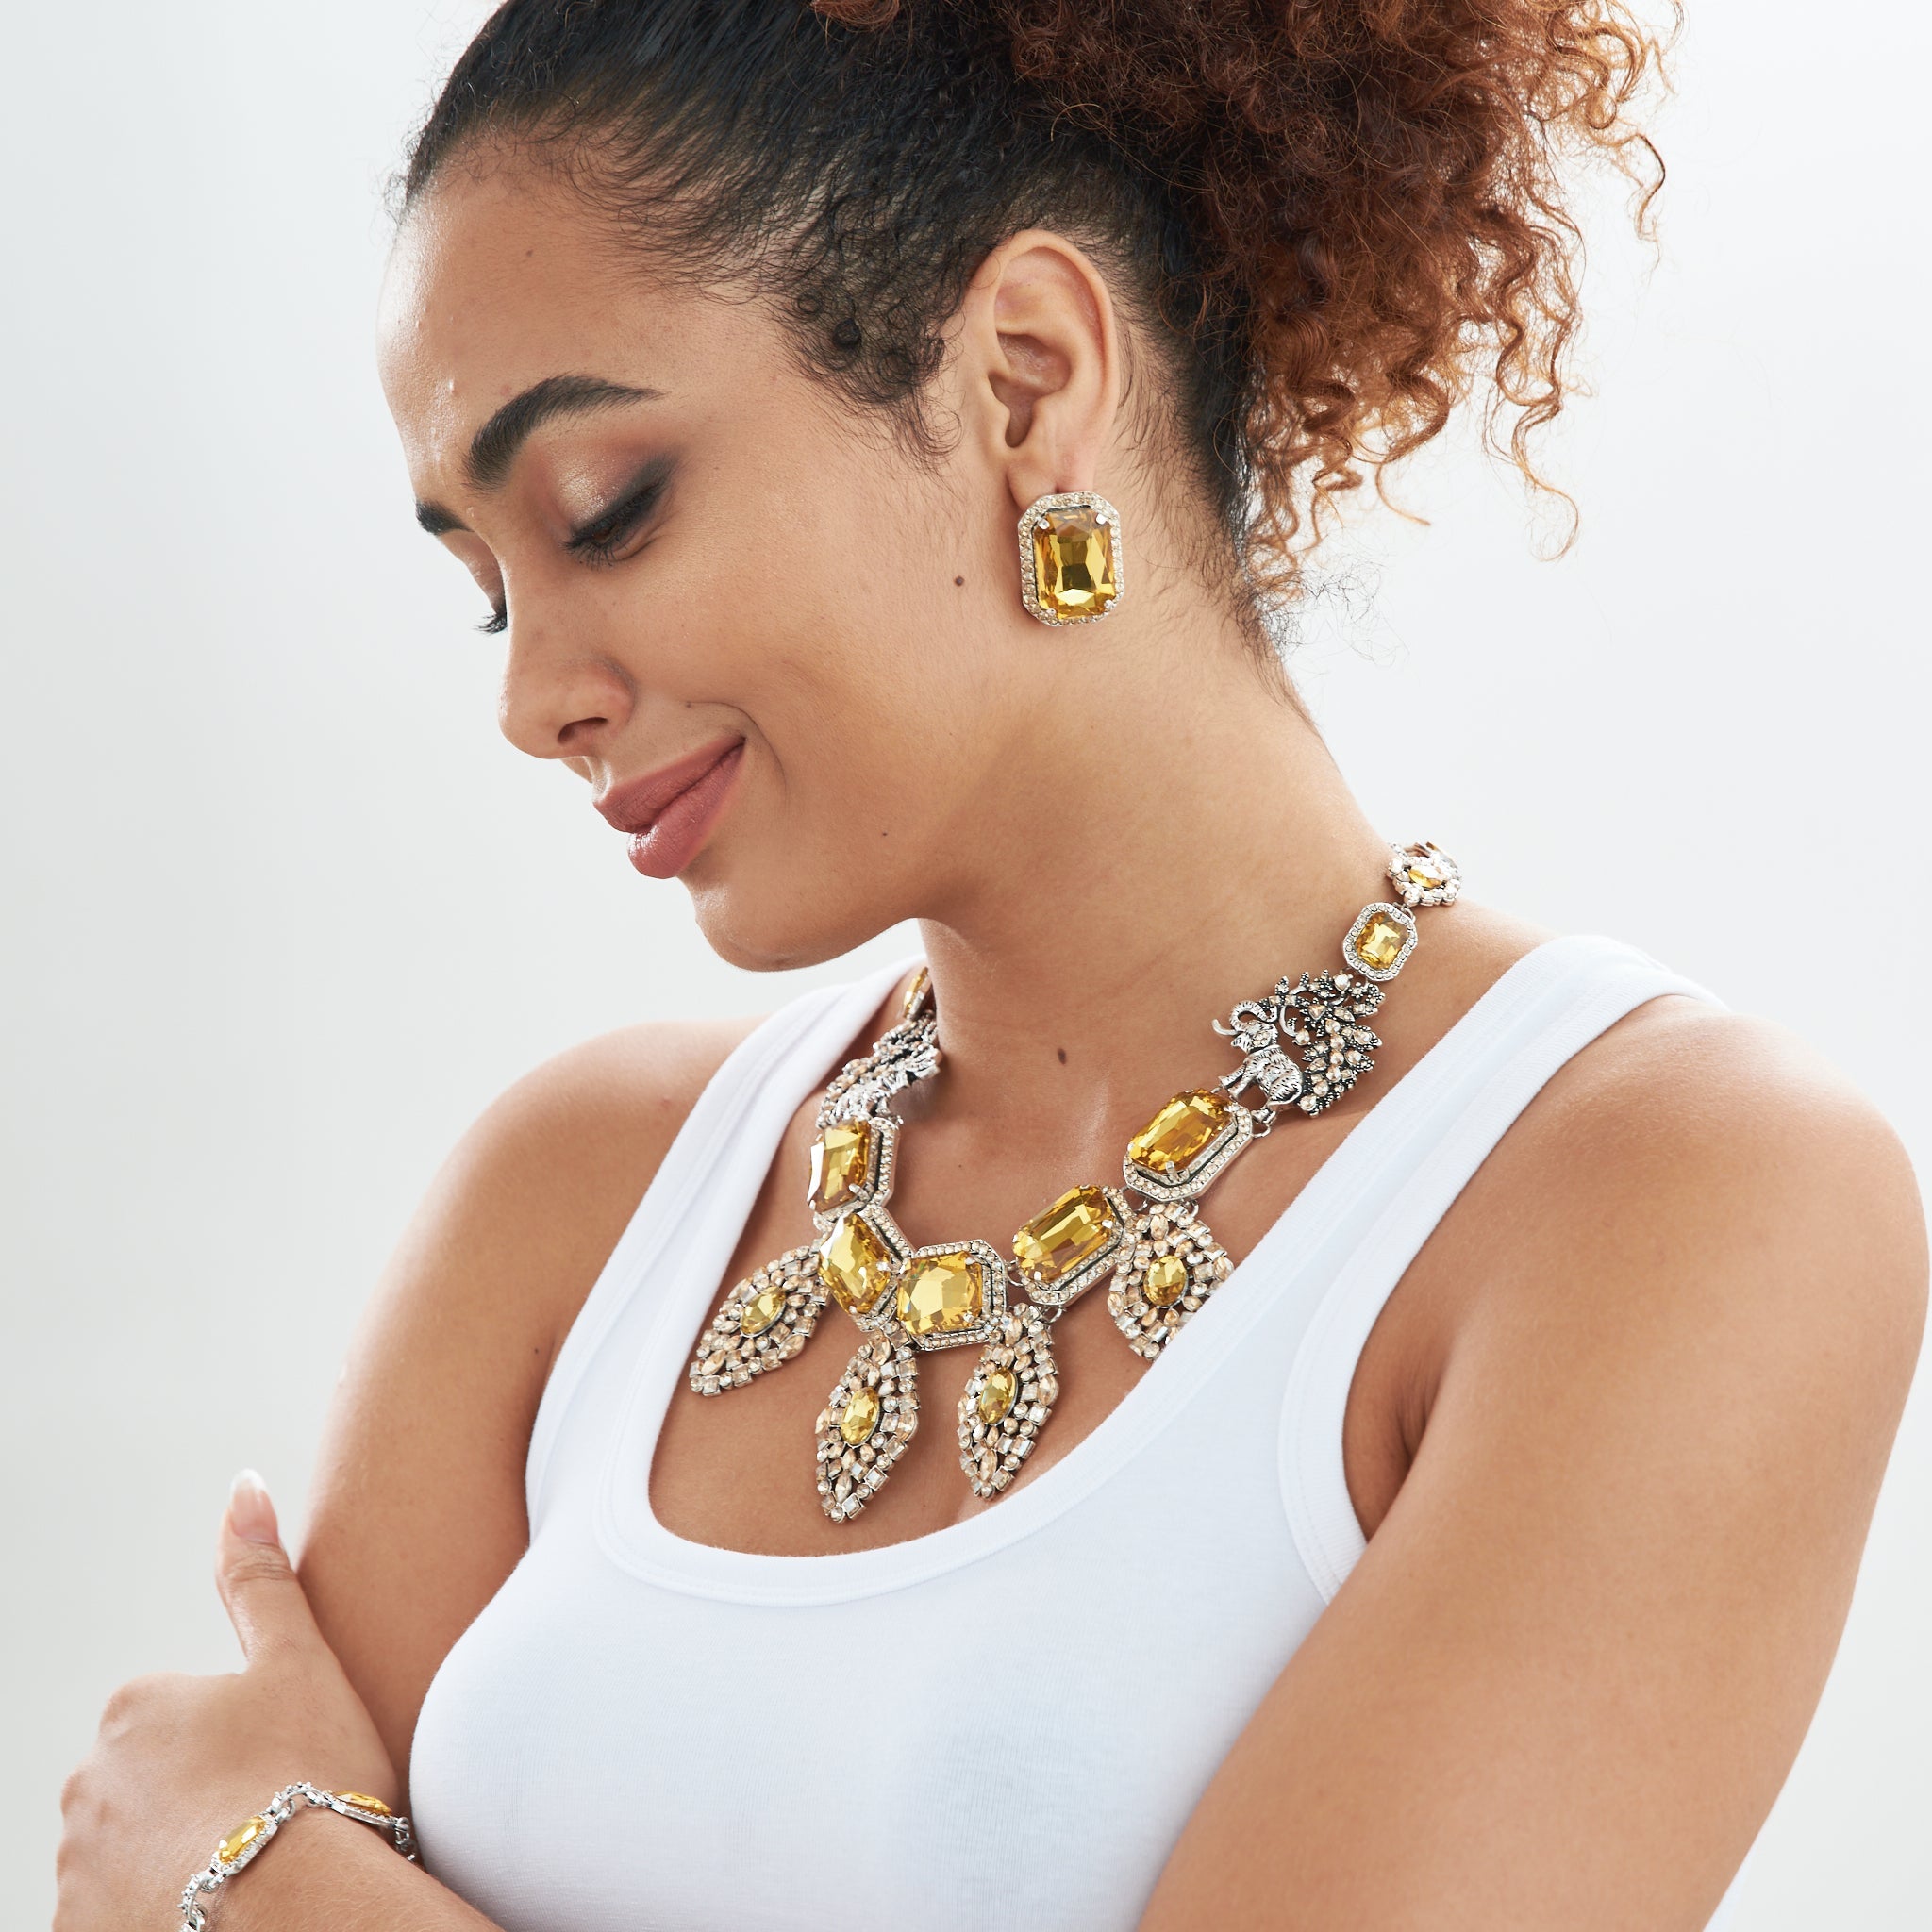 Whitley Heirloom Necklace - Canary - Sassy Jones beaded jewelry, handcrafted necklaces, vibrant colors, intricate designs, timeless elegance, glass beads, gemstones, natural elements, sophistication, special occasions, casual wear, thoughtful gifts, artistry, fashion, Handcrafted jewelry, Playful design